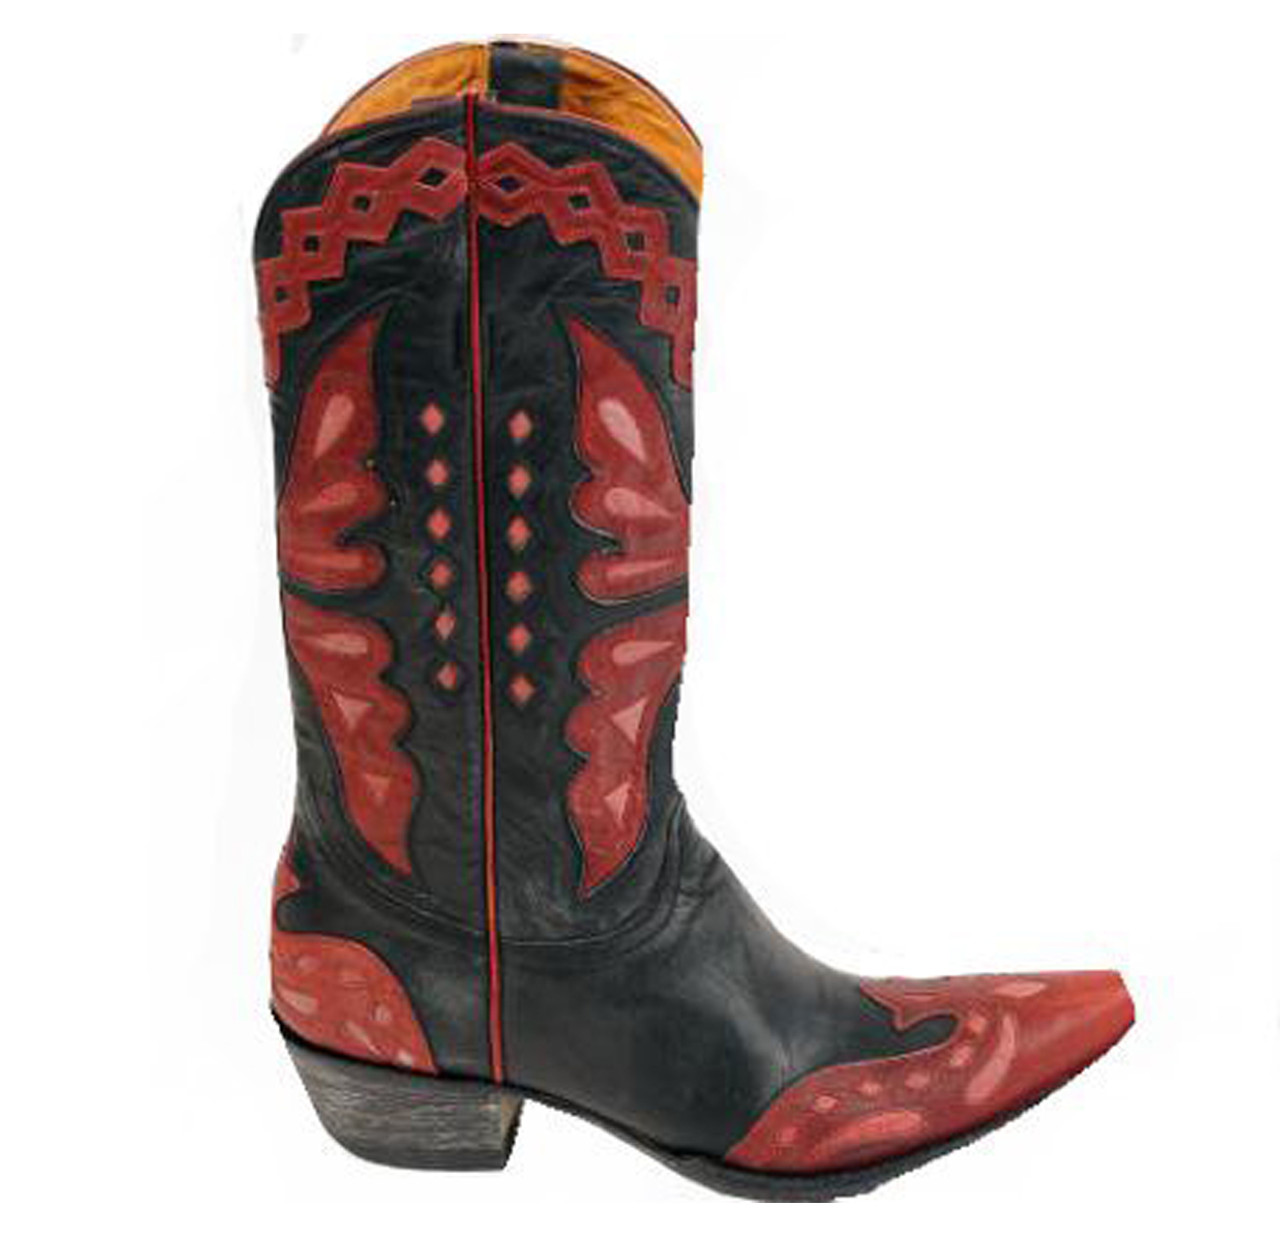 black and pink cowboy boots